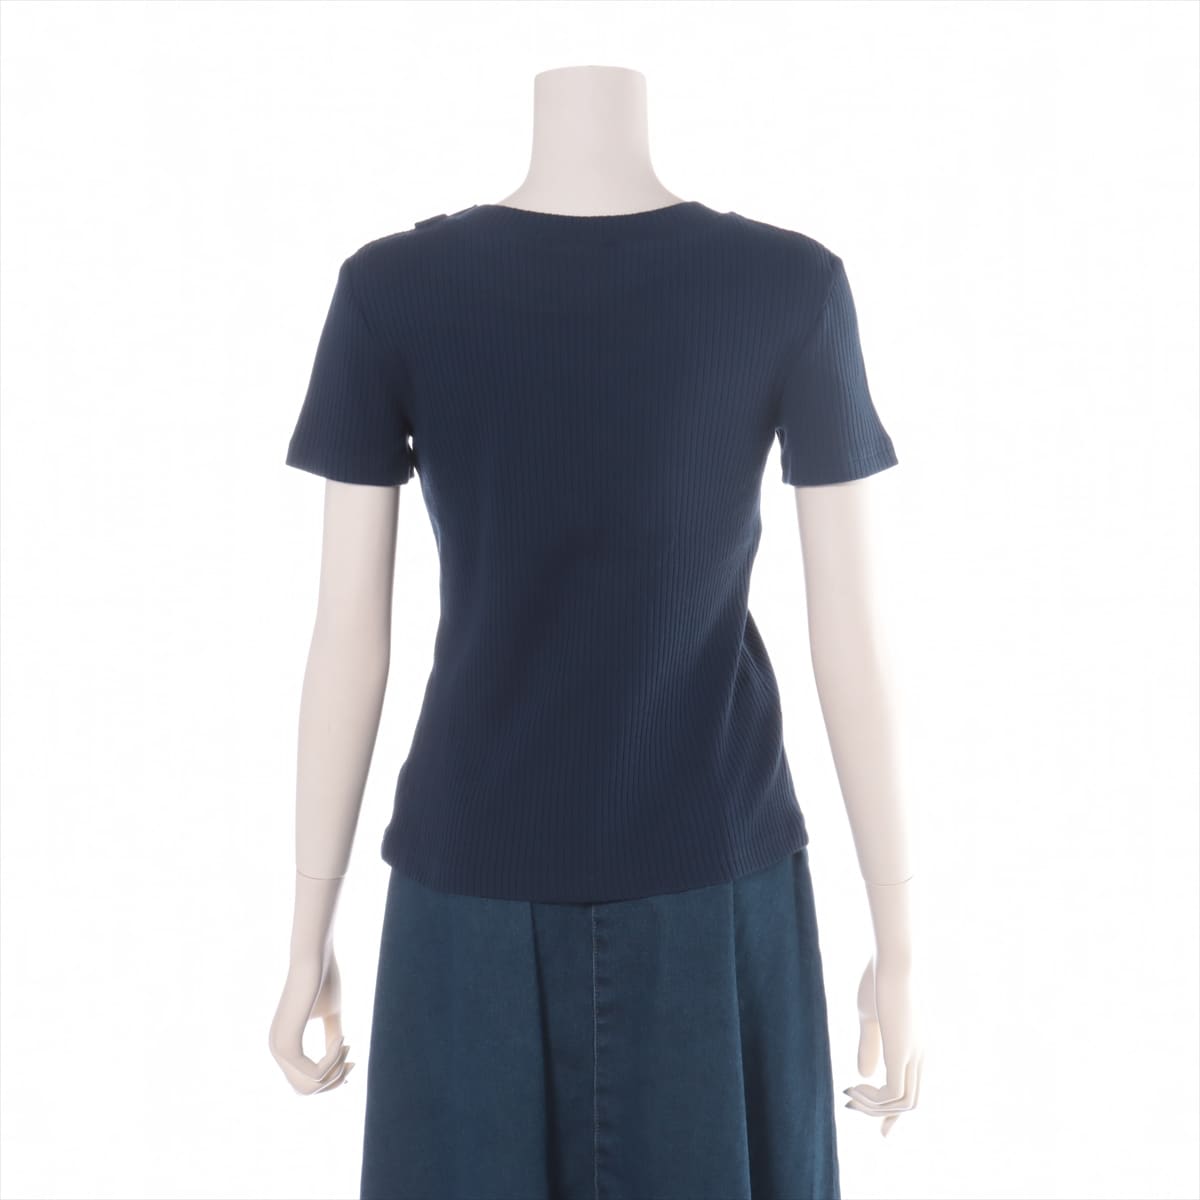 Chanel Coco Button P59 Rayon * Naylon T-shirt 34 Ladies' Navy blue  Anchor